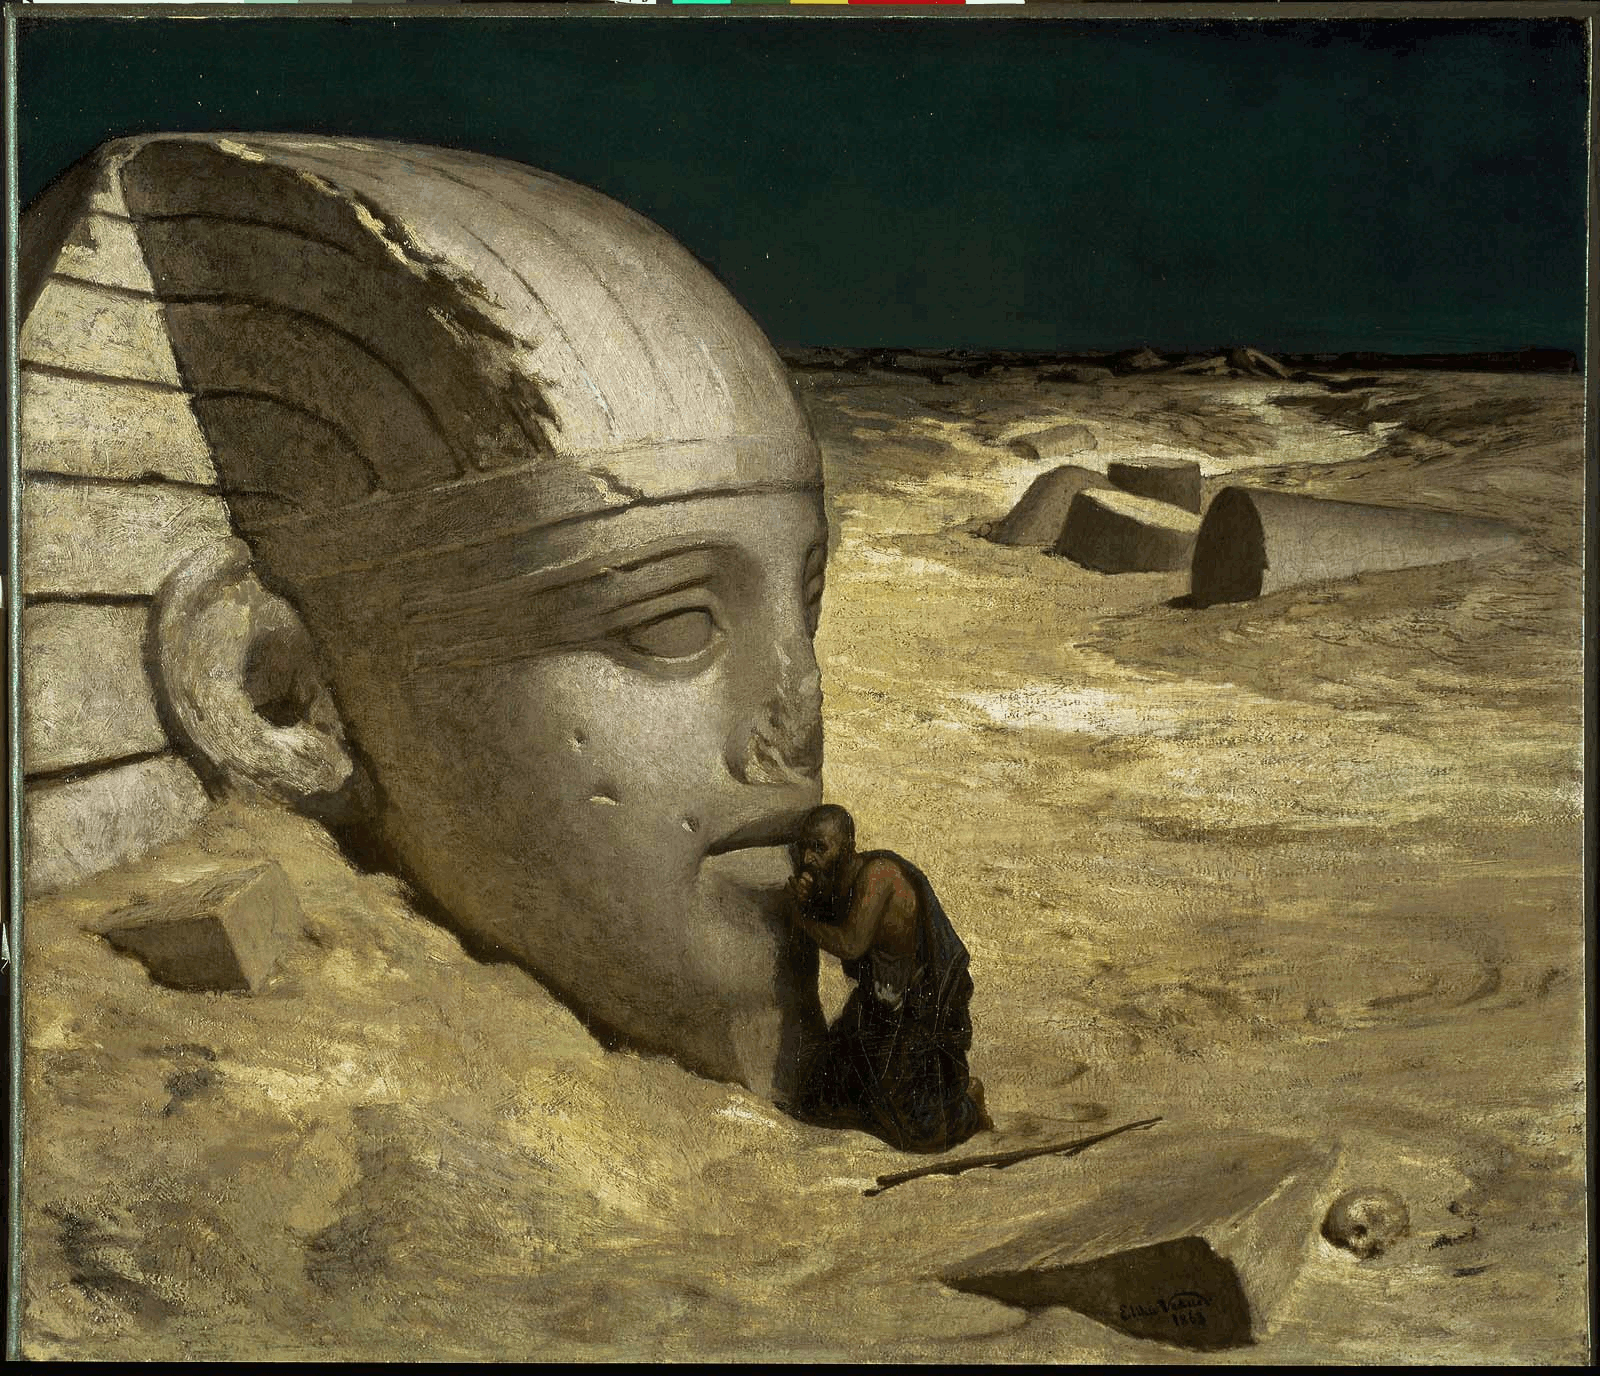 A man kneeling in front of a massive Egyptian statue of a pharaoh's head